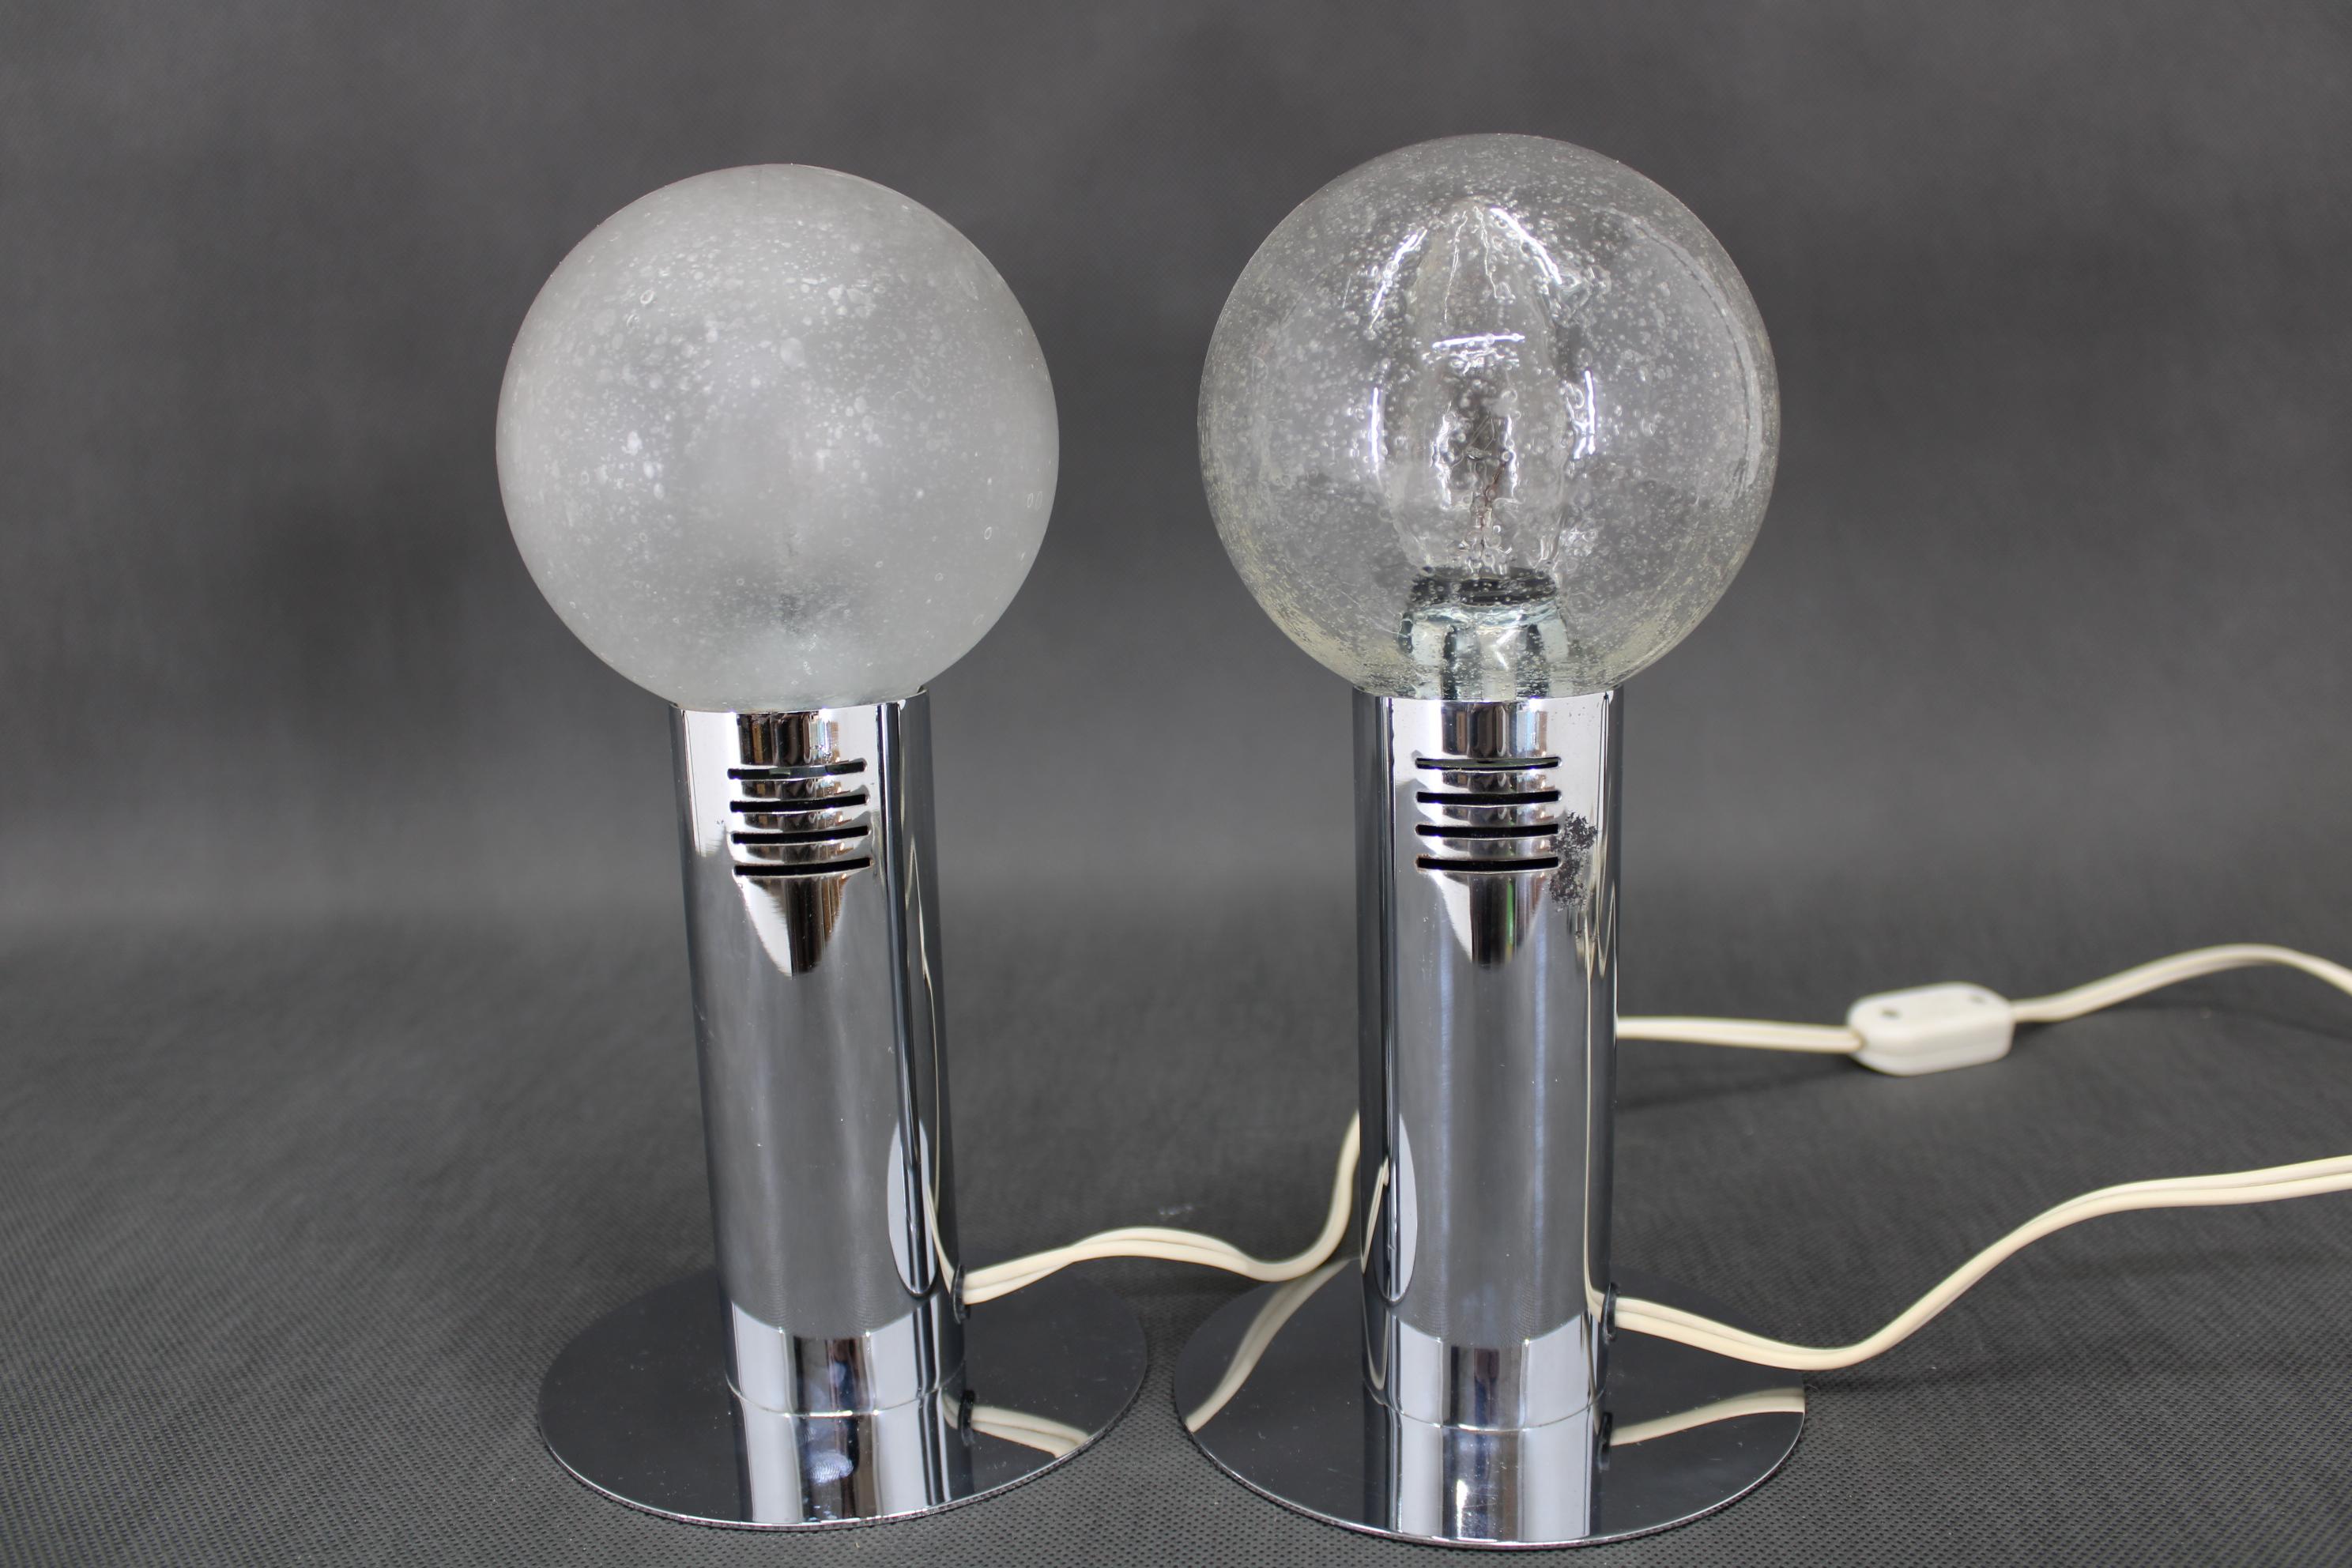 - Good original condition with minor signs of use 
- E14 or E12bulb
- US adapter included.